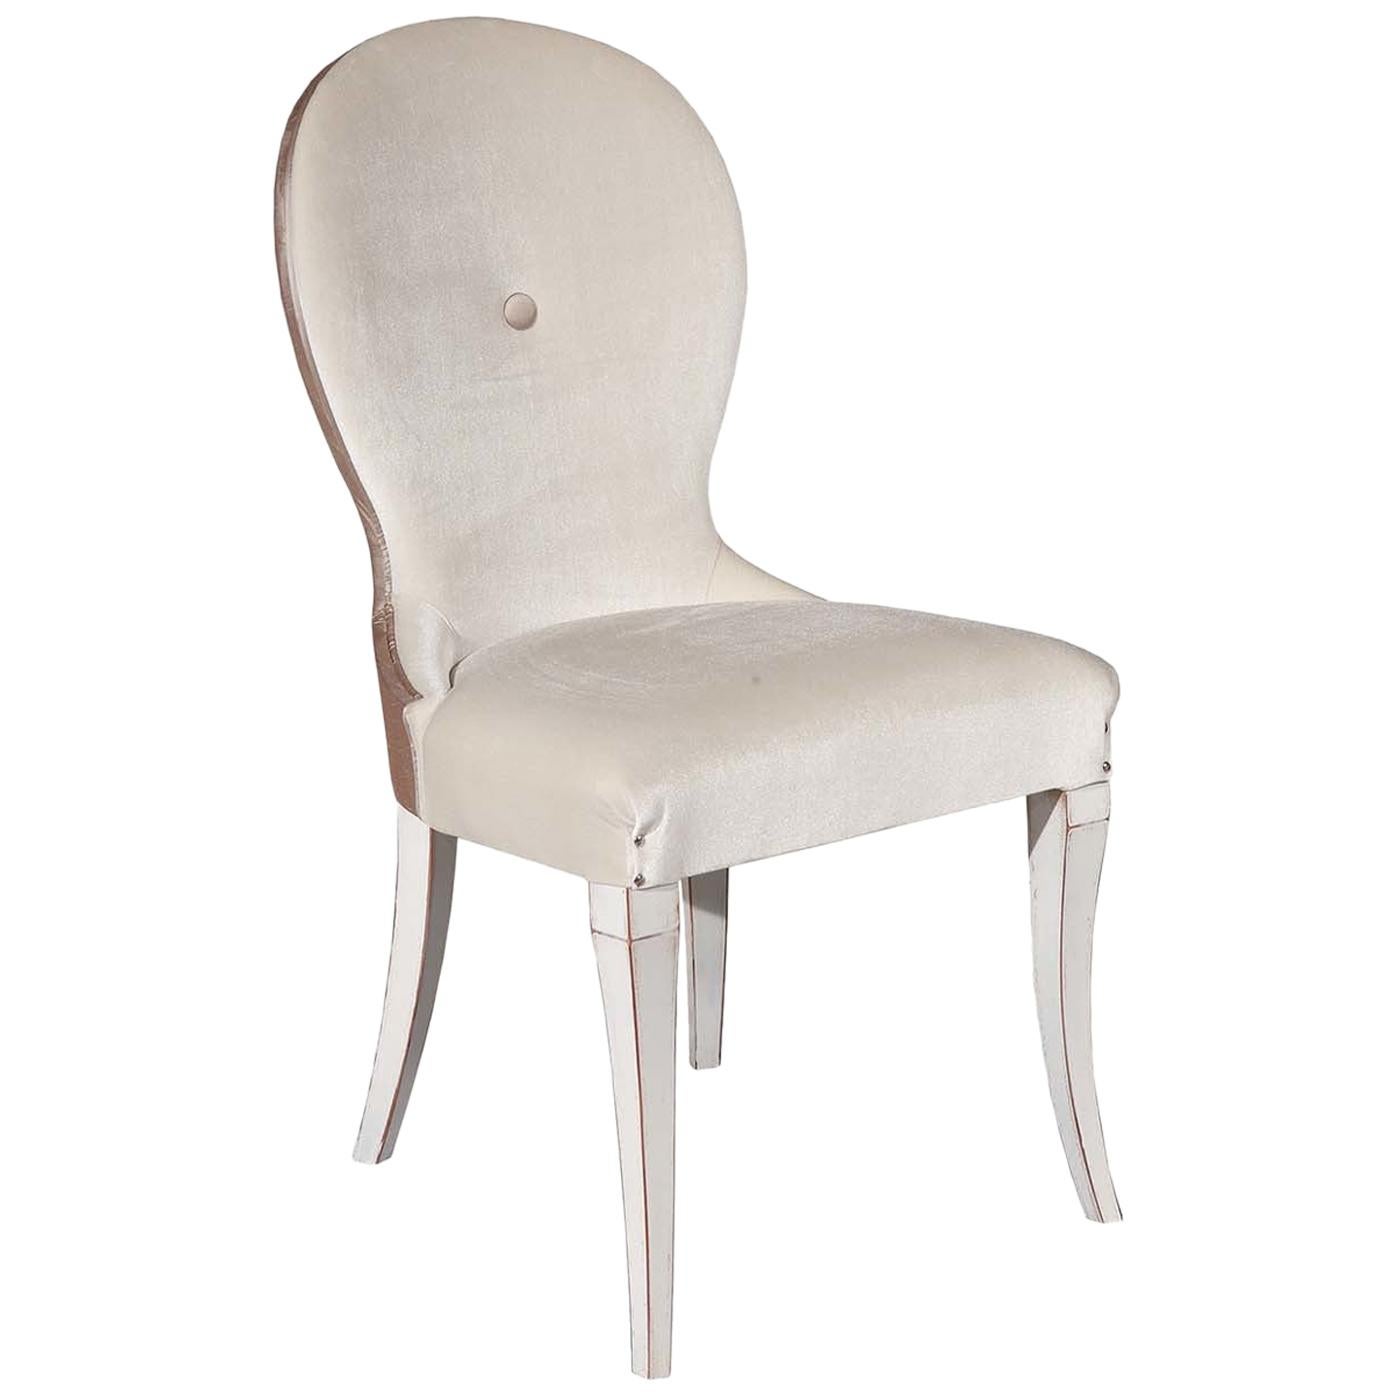 Distressed White Chair For Sale